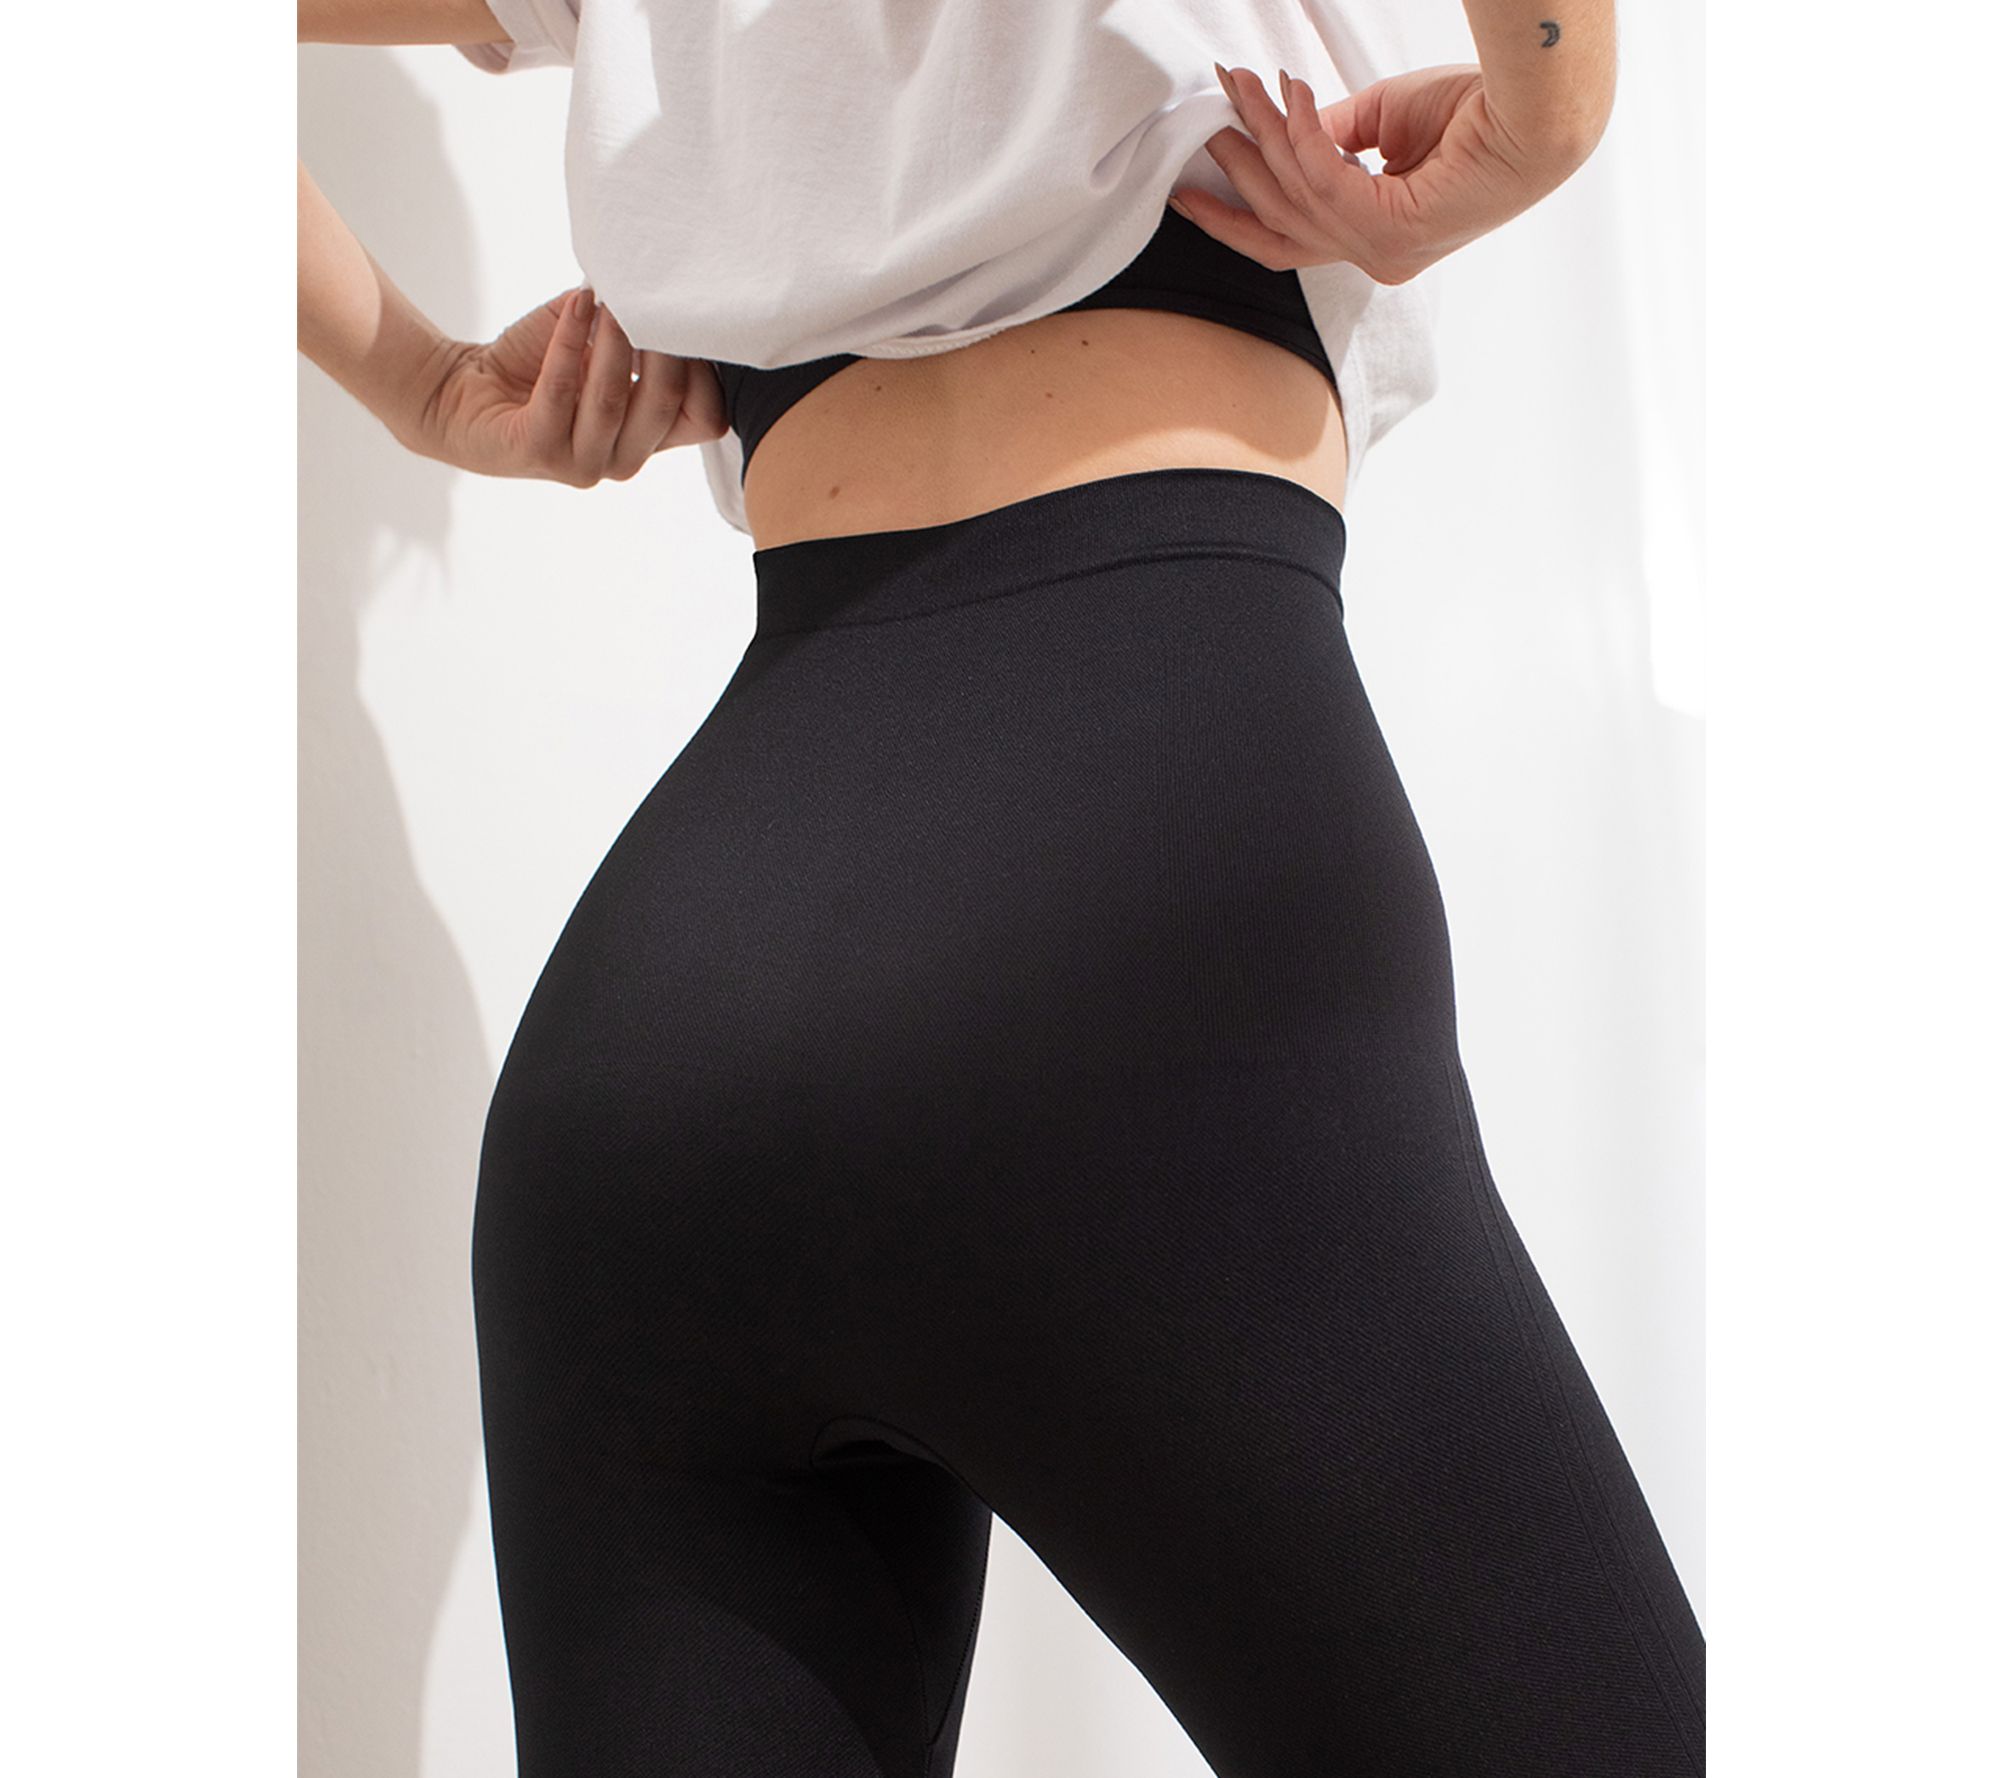 🌟 NWT Shapermint Essentials High Waisted Shaping Leggings🌟 Size 2X - $28  - From Carol